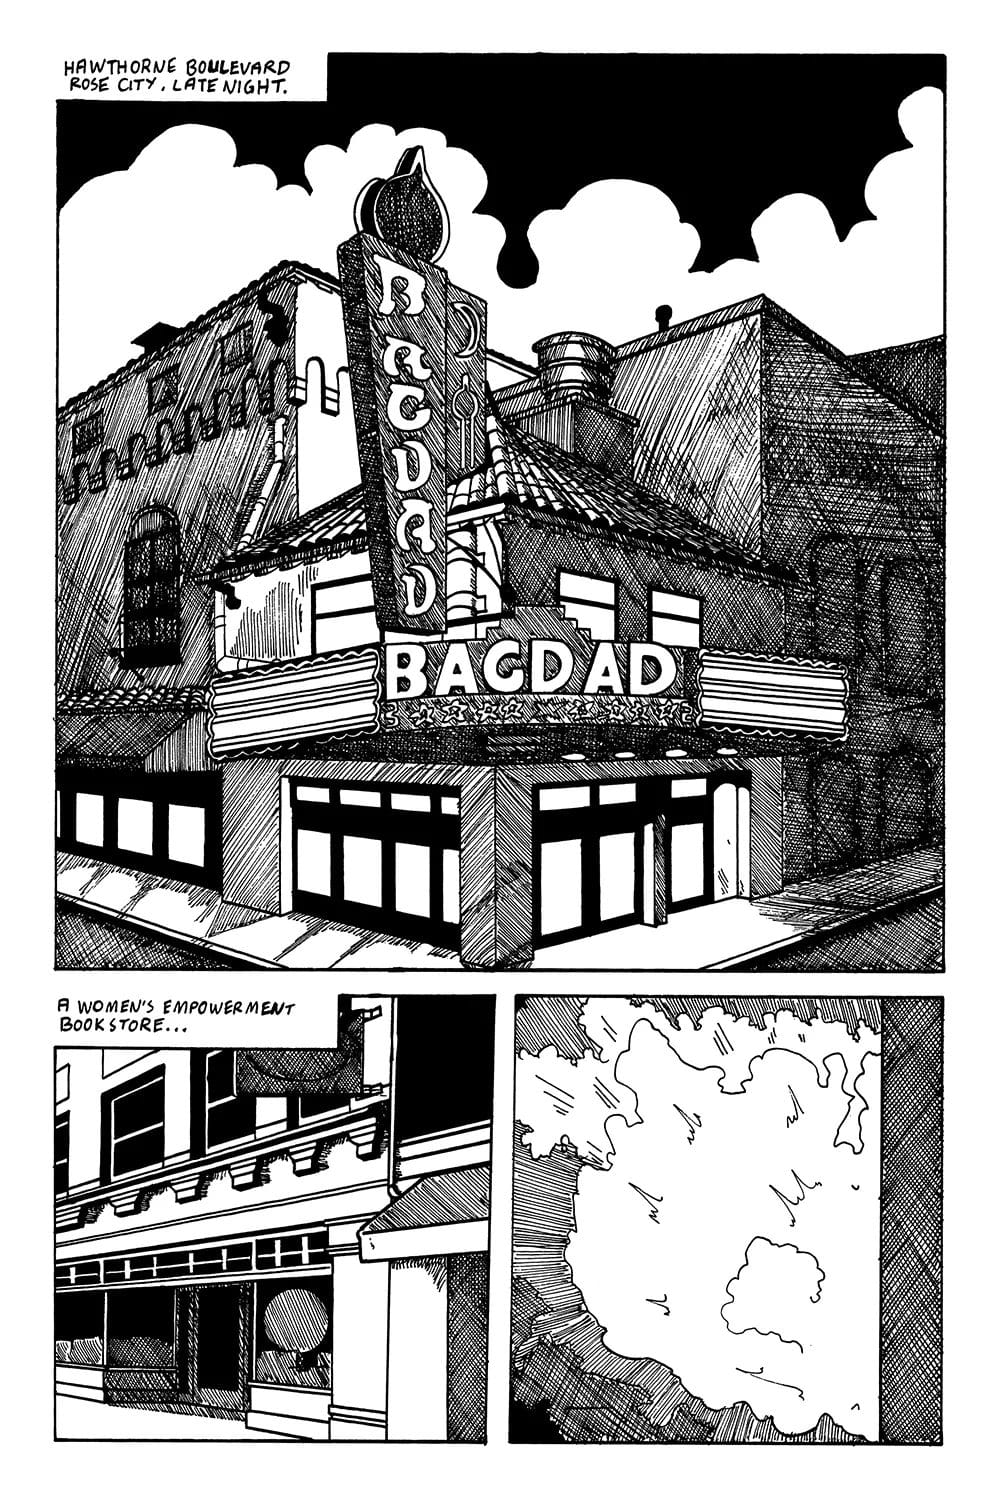 An explosion at the Bagdad Theatre.